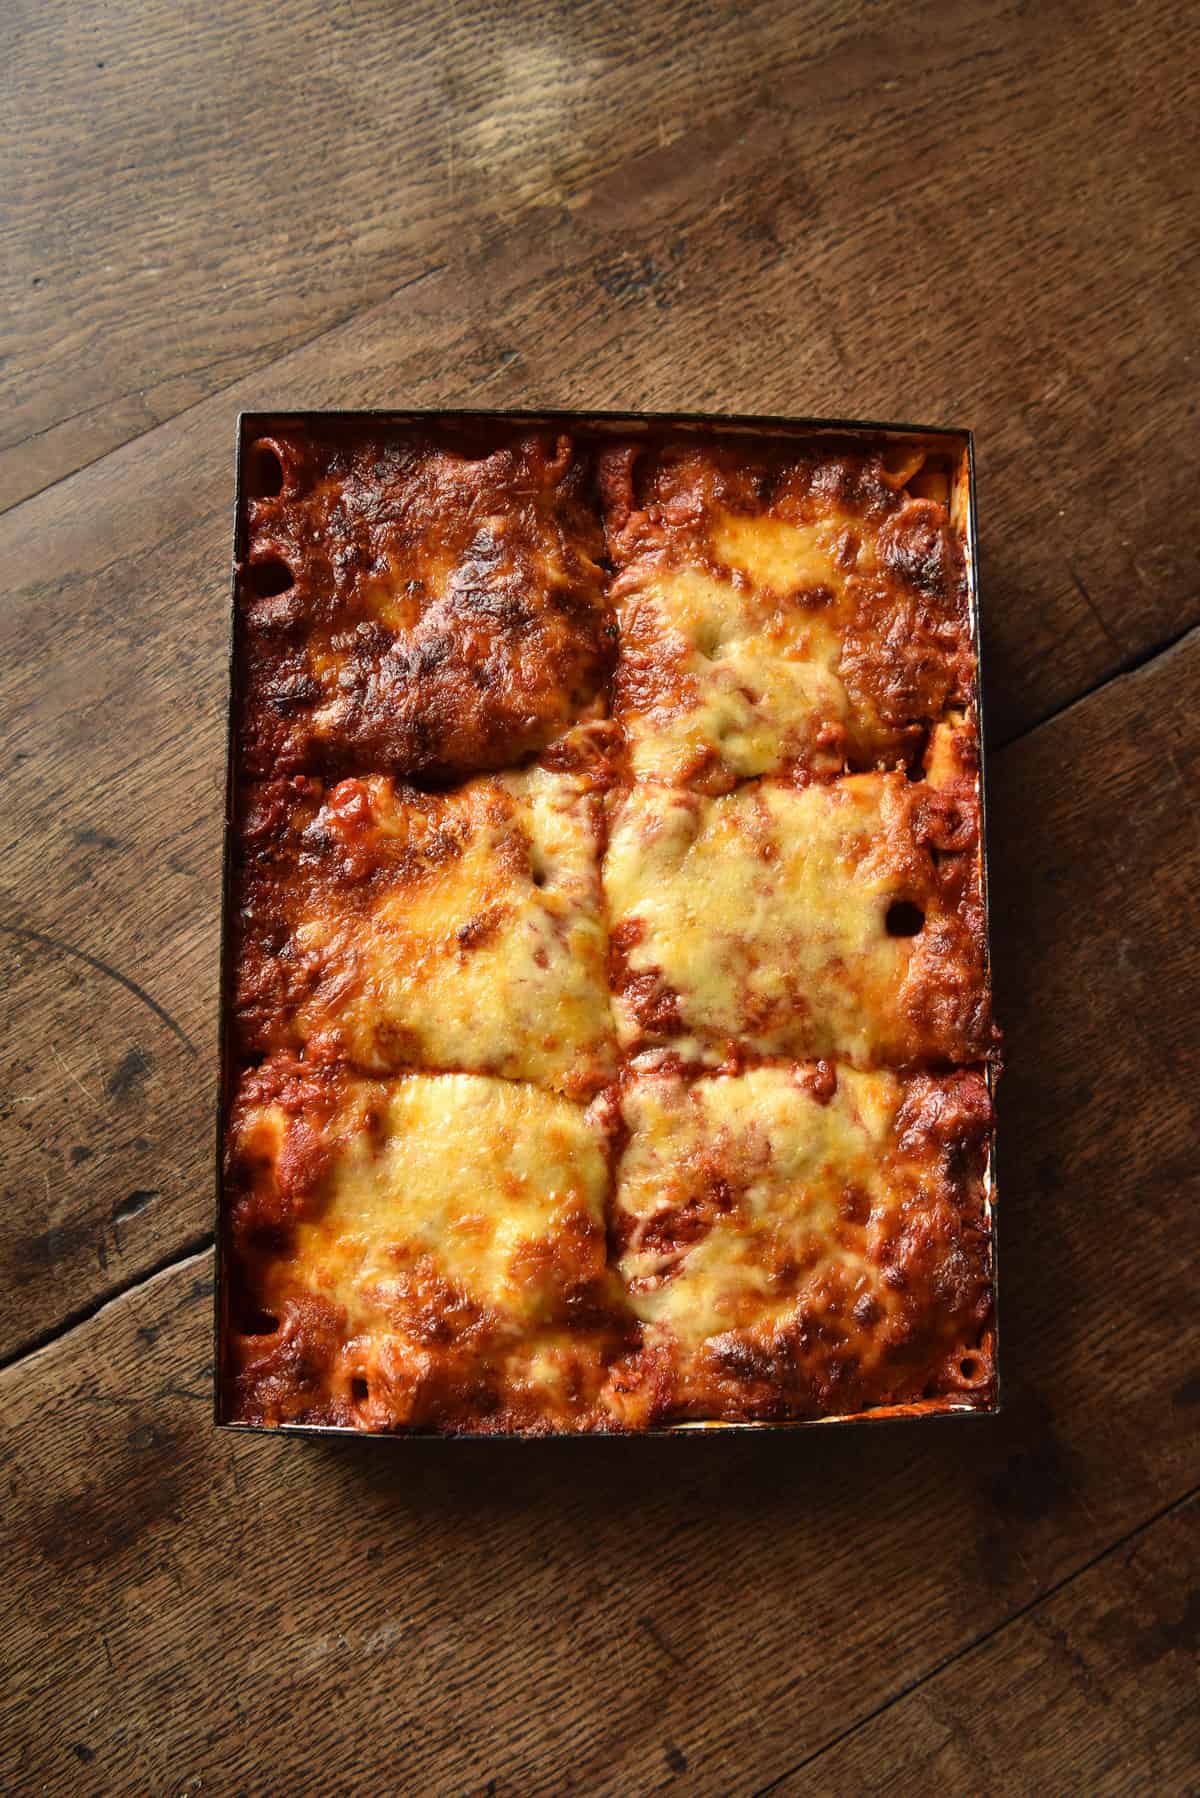 An aerial view of a spinach and ricotta pasta bake sitting atop a wooden table. The bake is cheesy and golden which compliments the warm tones of the wood.